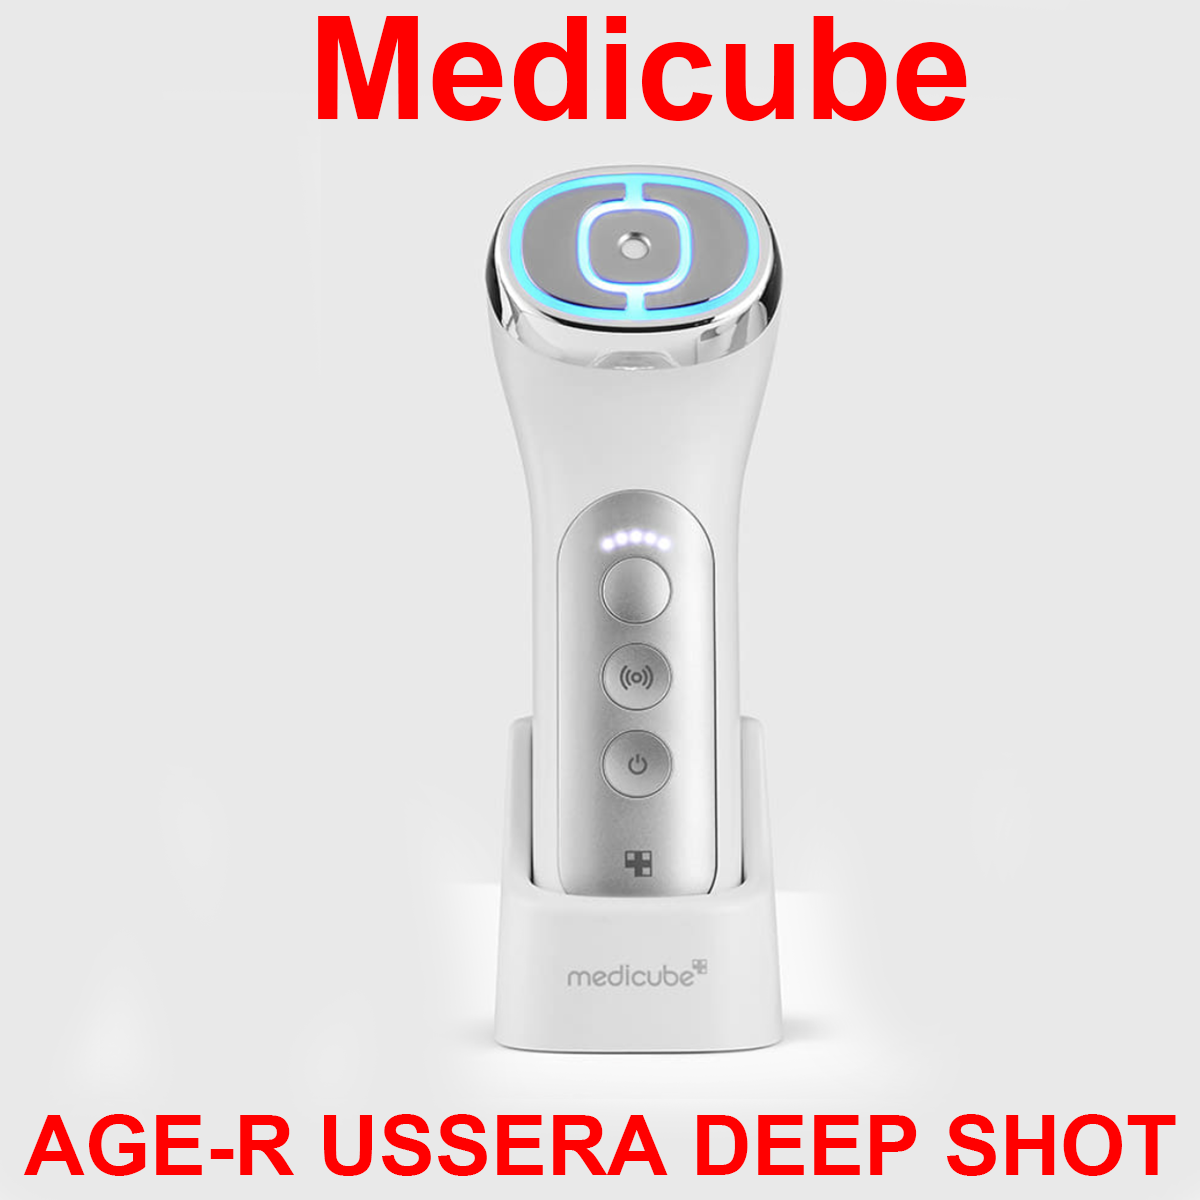 Medicube AGE-R USSERA DEEP SHOT + Charging stand / Home Skin Care